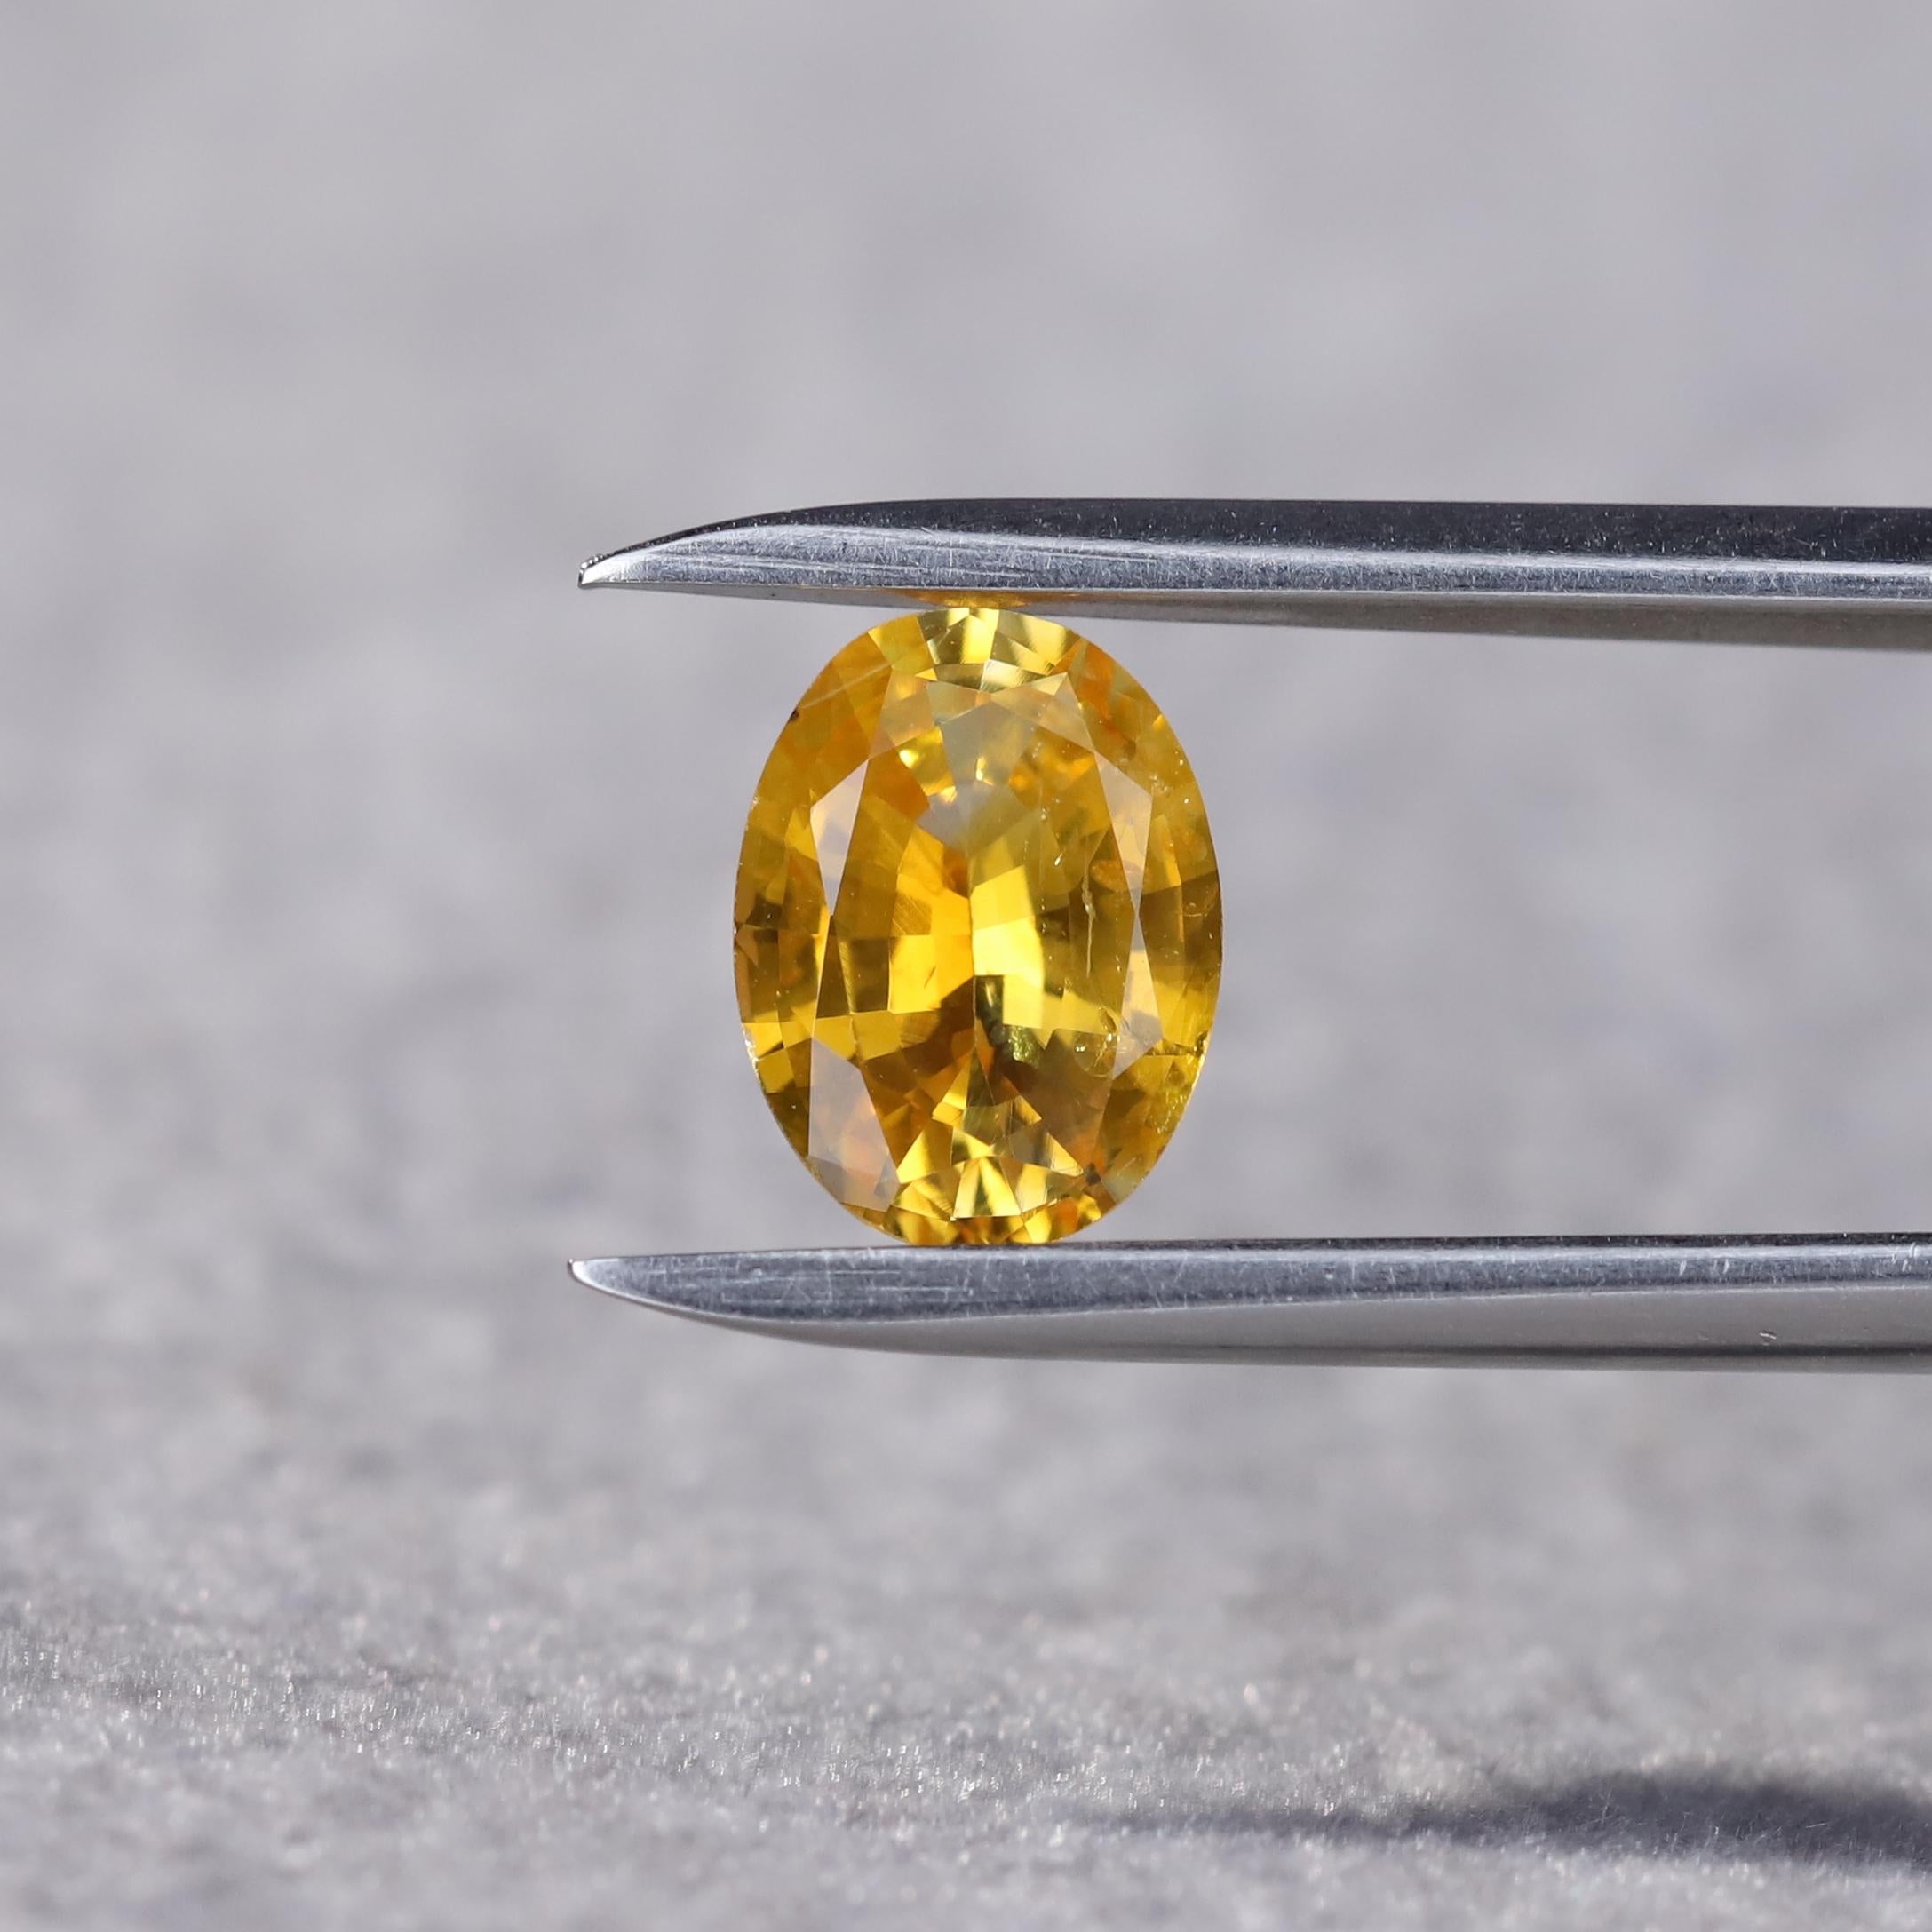 1.42 Carat Oval Cut Natural Golden Yellow Sapphire Loose Gemstone from Sri Lanka For Sale 1